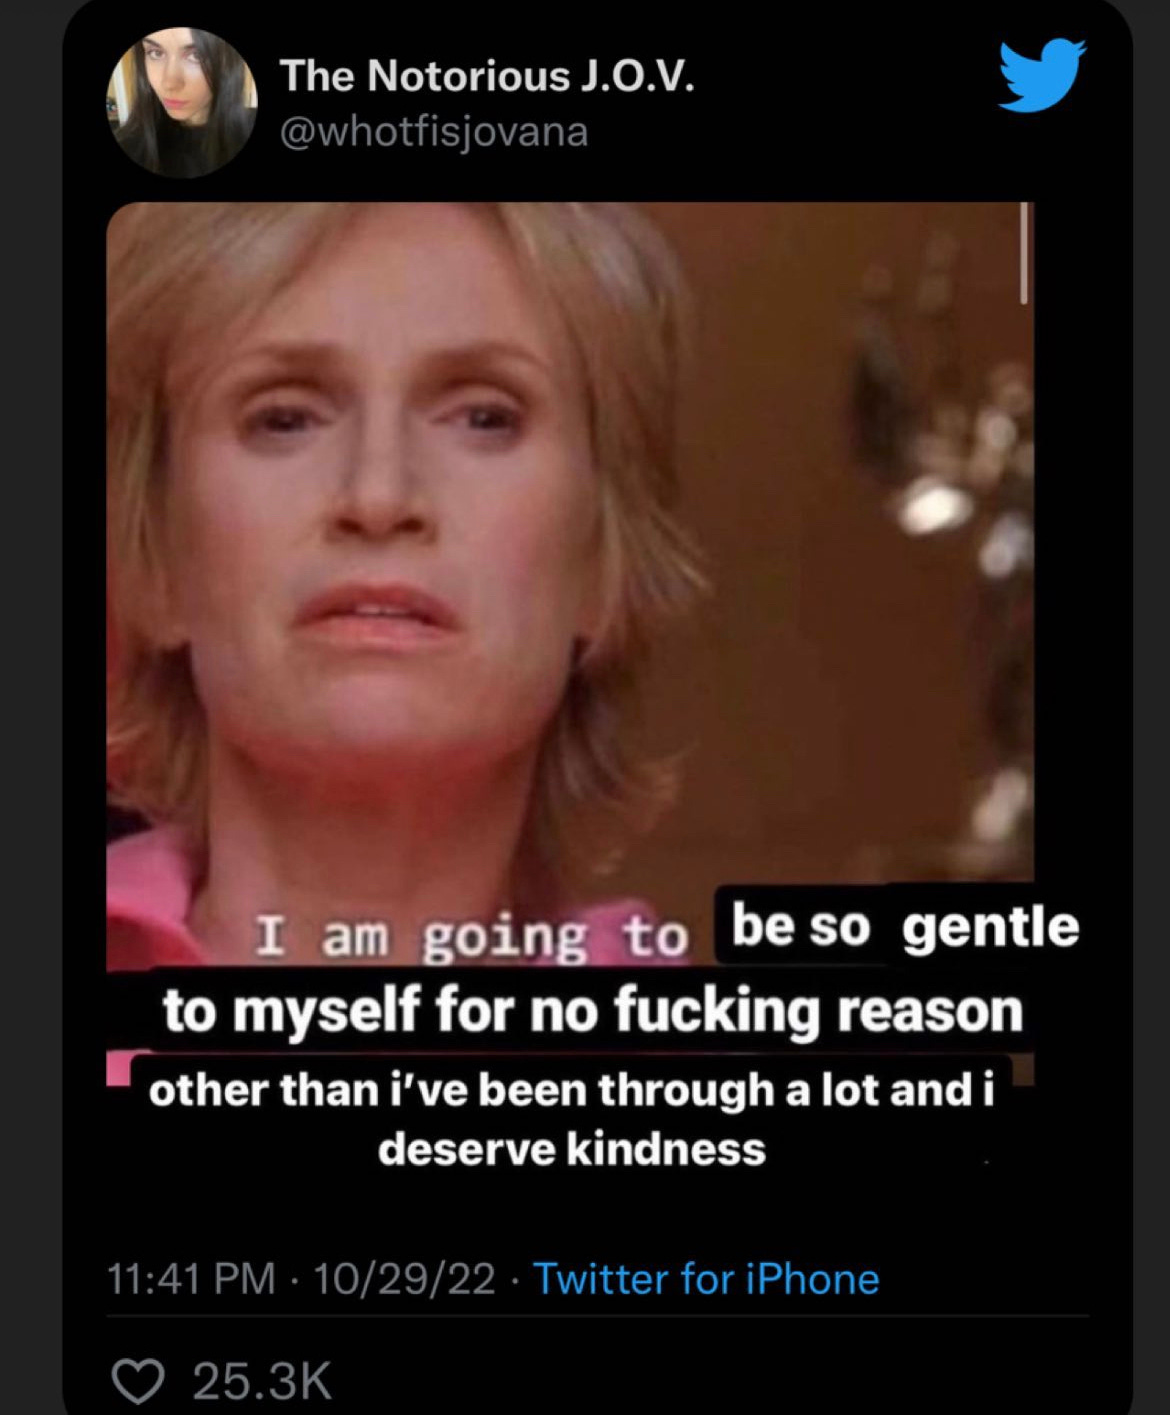 screenshot of tweet from @whotfisjovana, which is a screencap from glee of jane lynch. the original subtitle that is visible reads "i am going to" and the rest of it is blacked out and written over with the text "be so gentle to myself for no fucking reason other than i've been through alot and i deserve kindness"